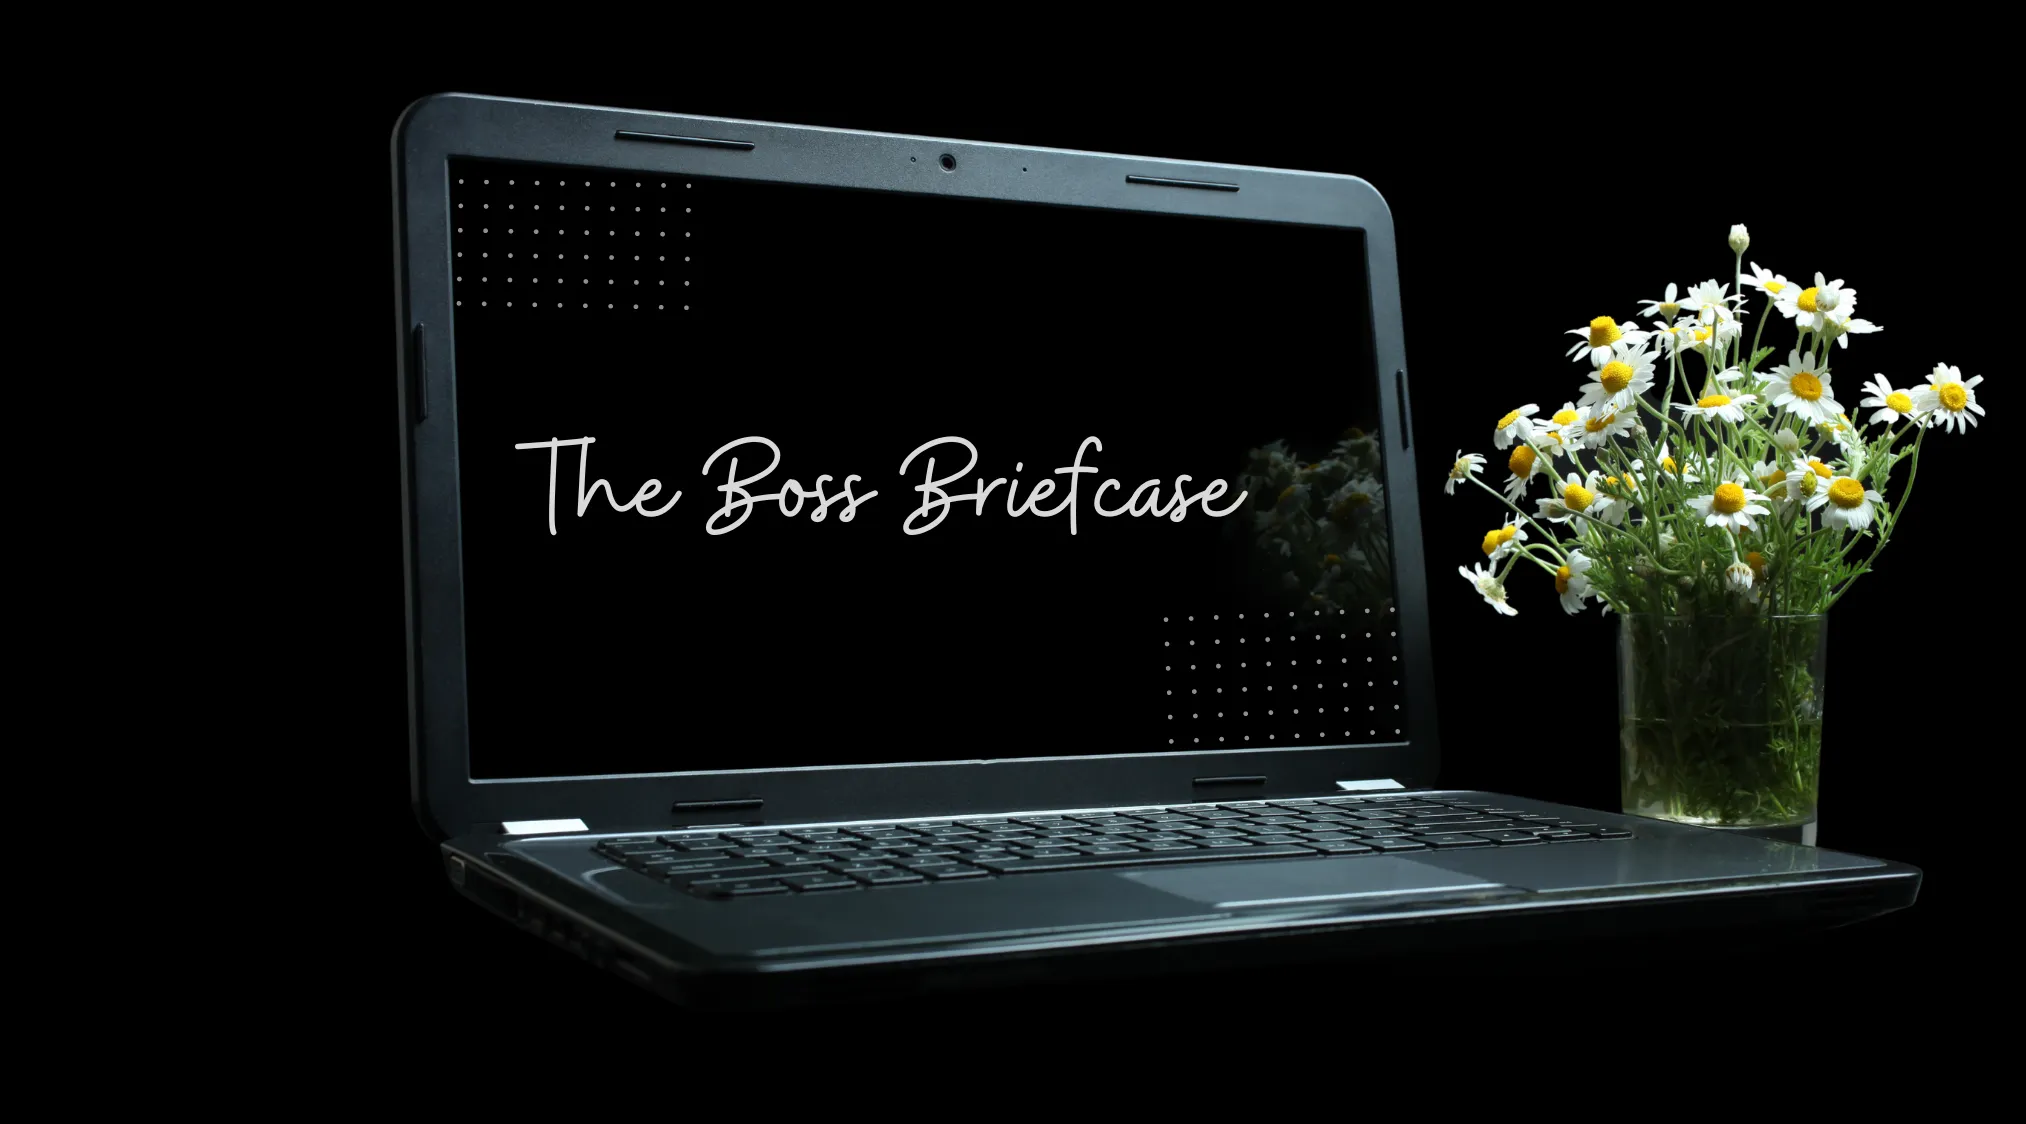 The Boss Briefcase laptop